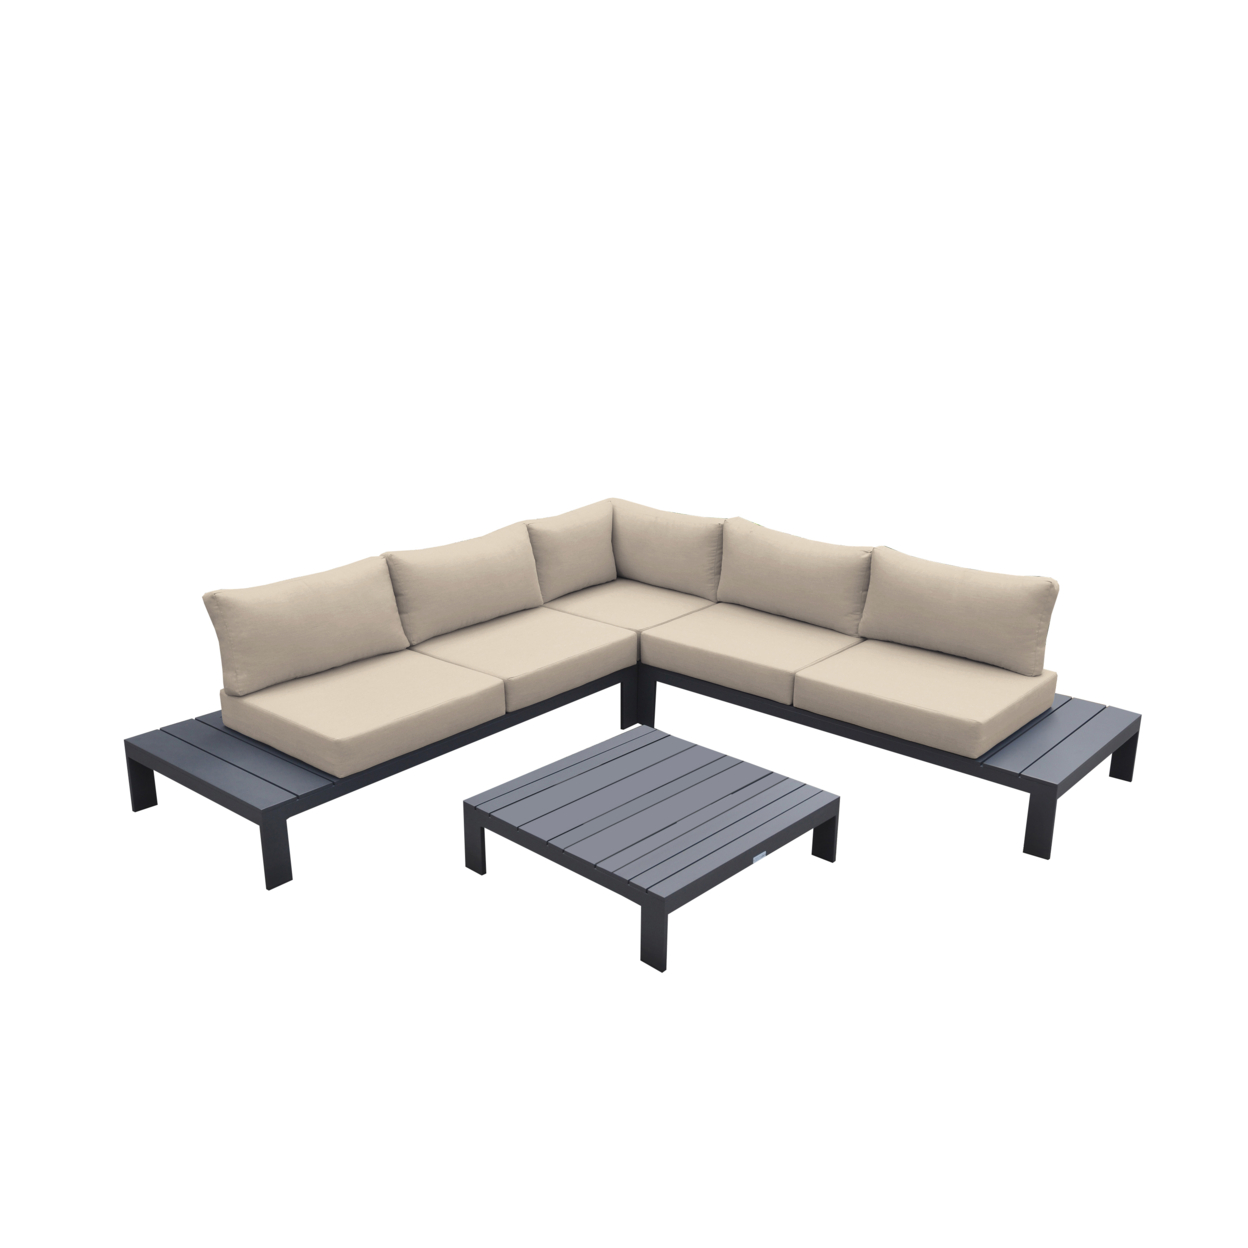 4 Piece Metal And Fabric Outdoor Sectional, Gray And Beige- Saltoro Sherpi